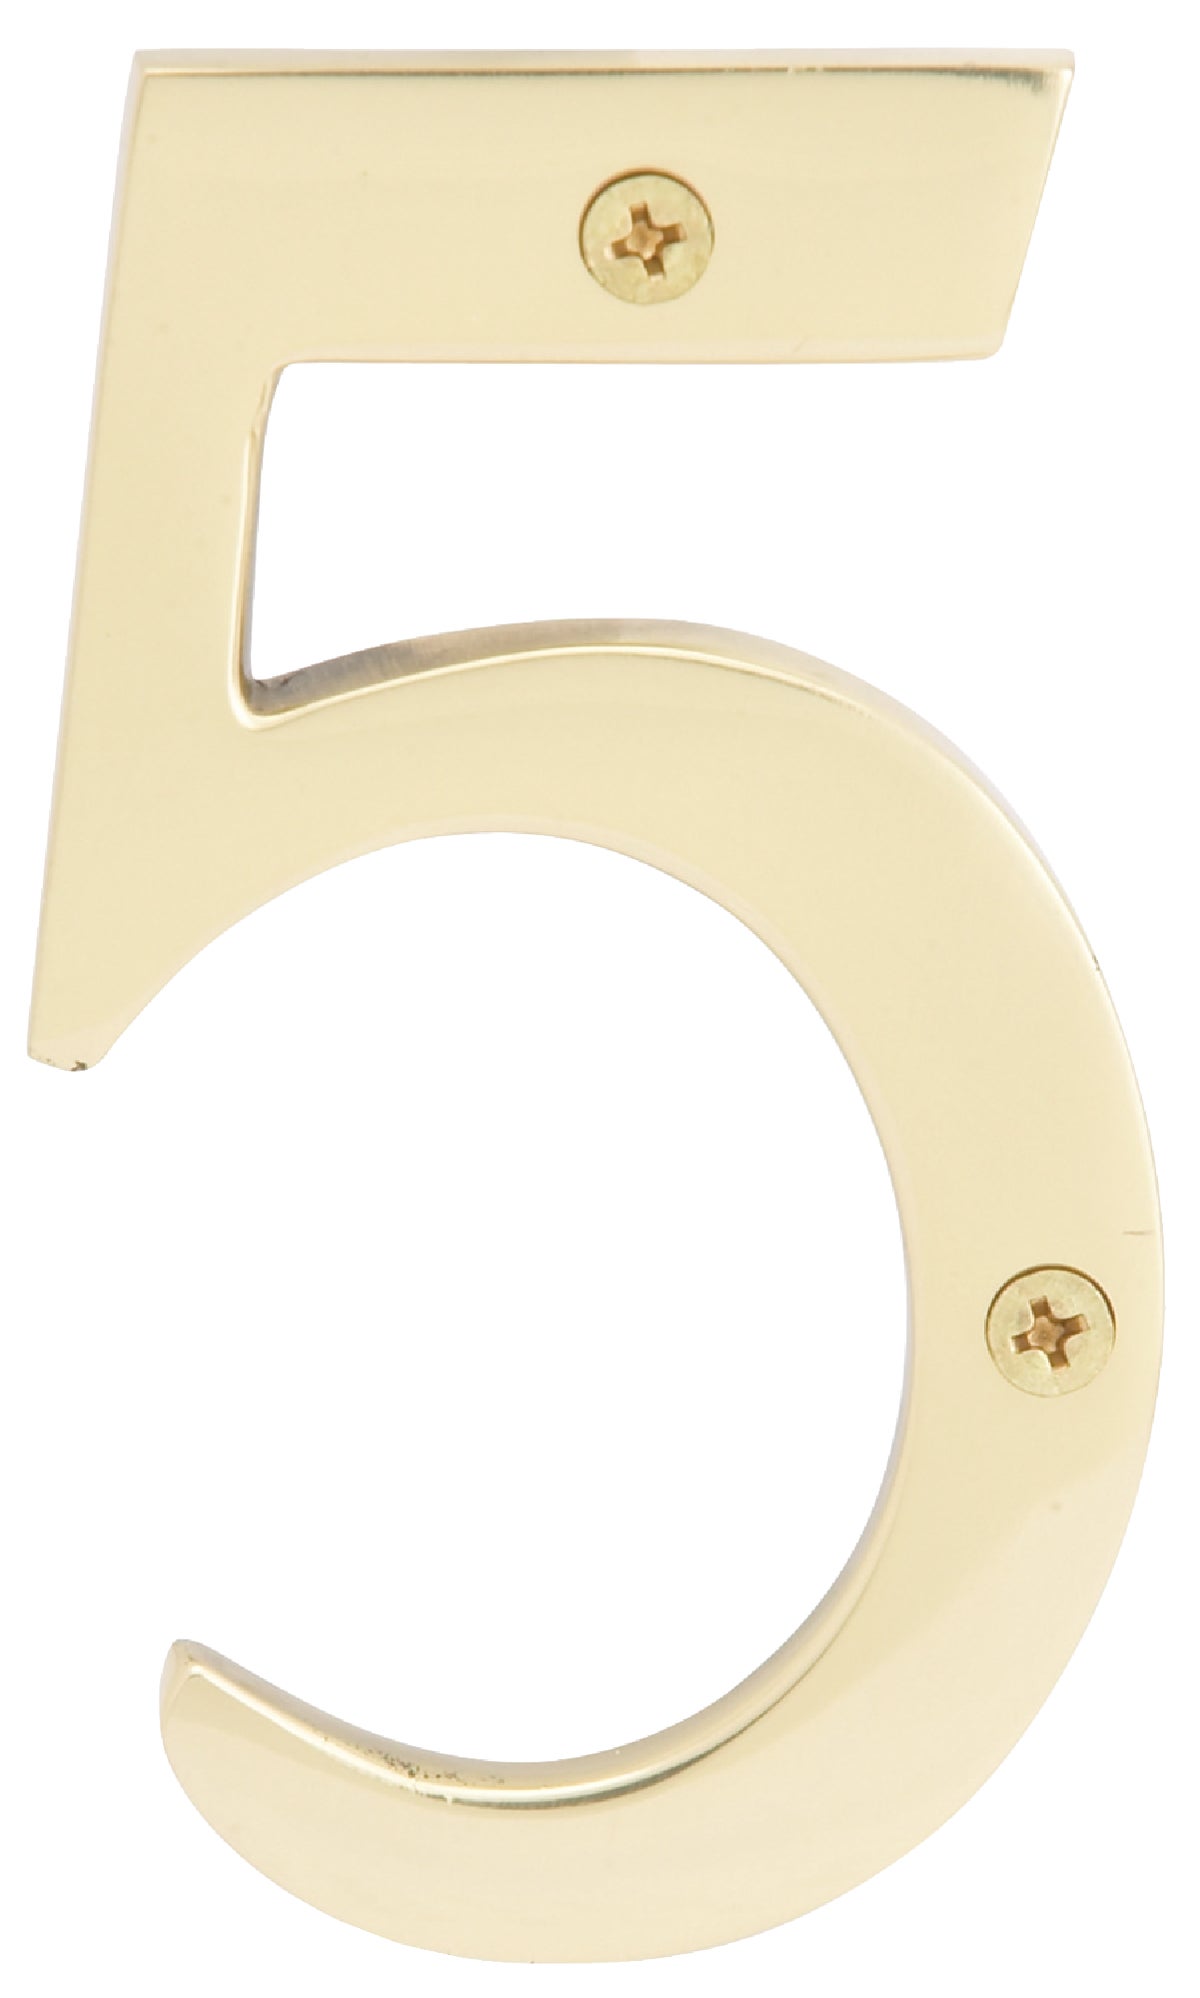 4 Solid Brass 3-D House Numbers Hyko Prod